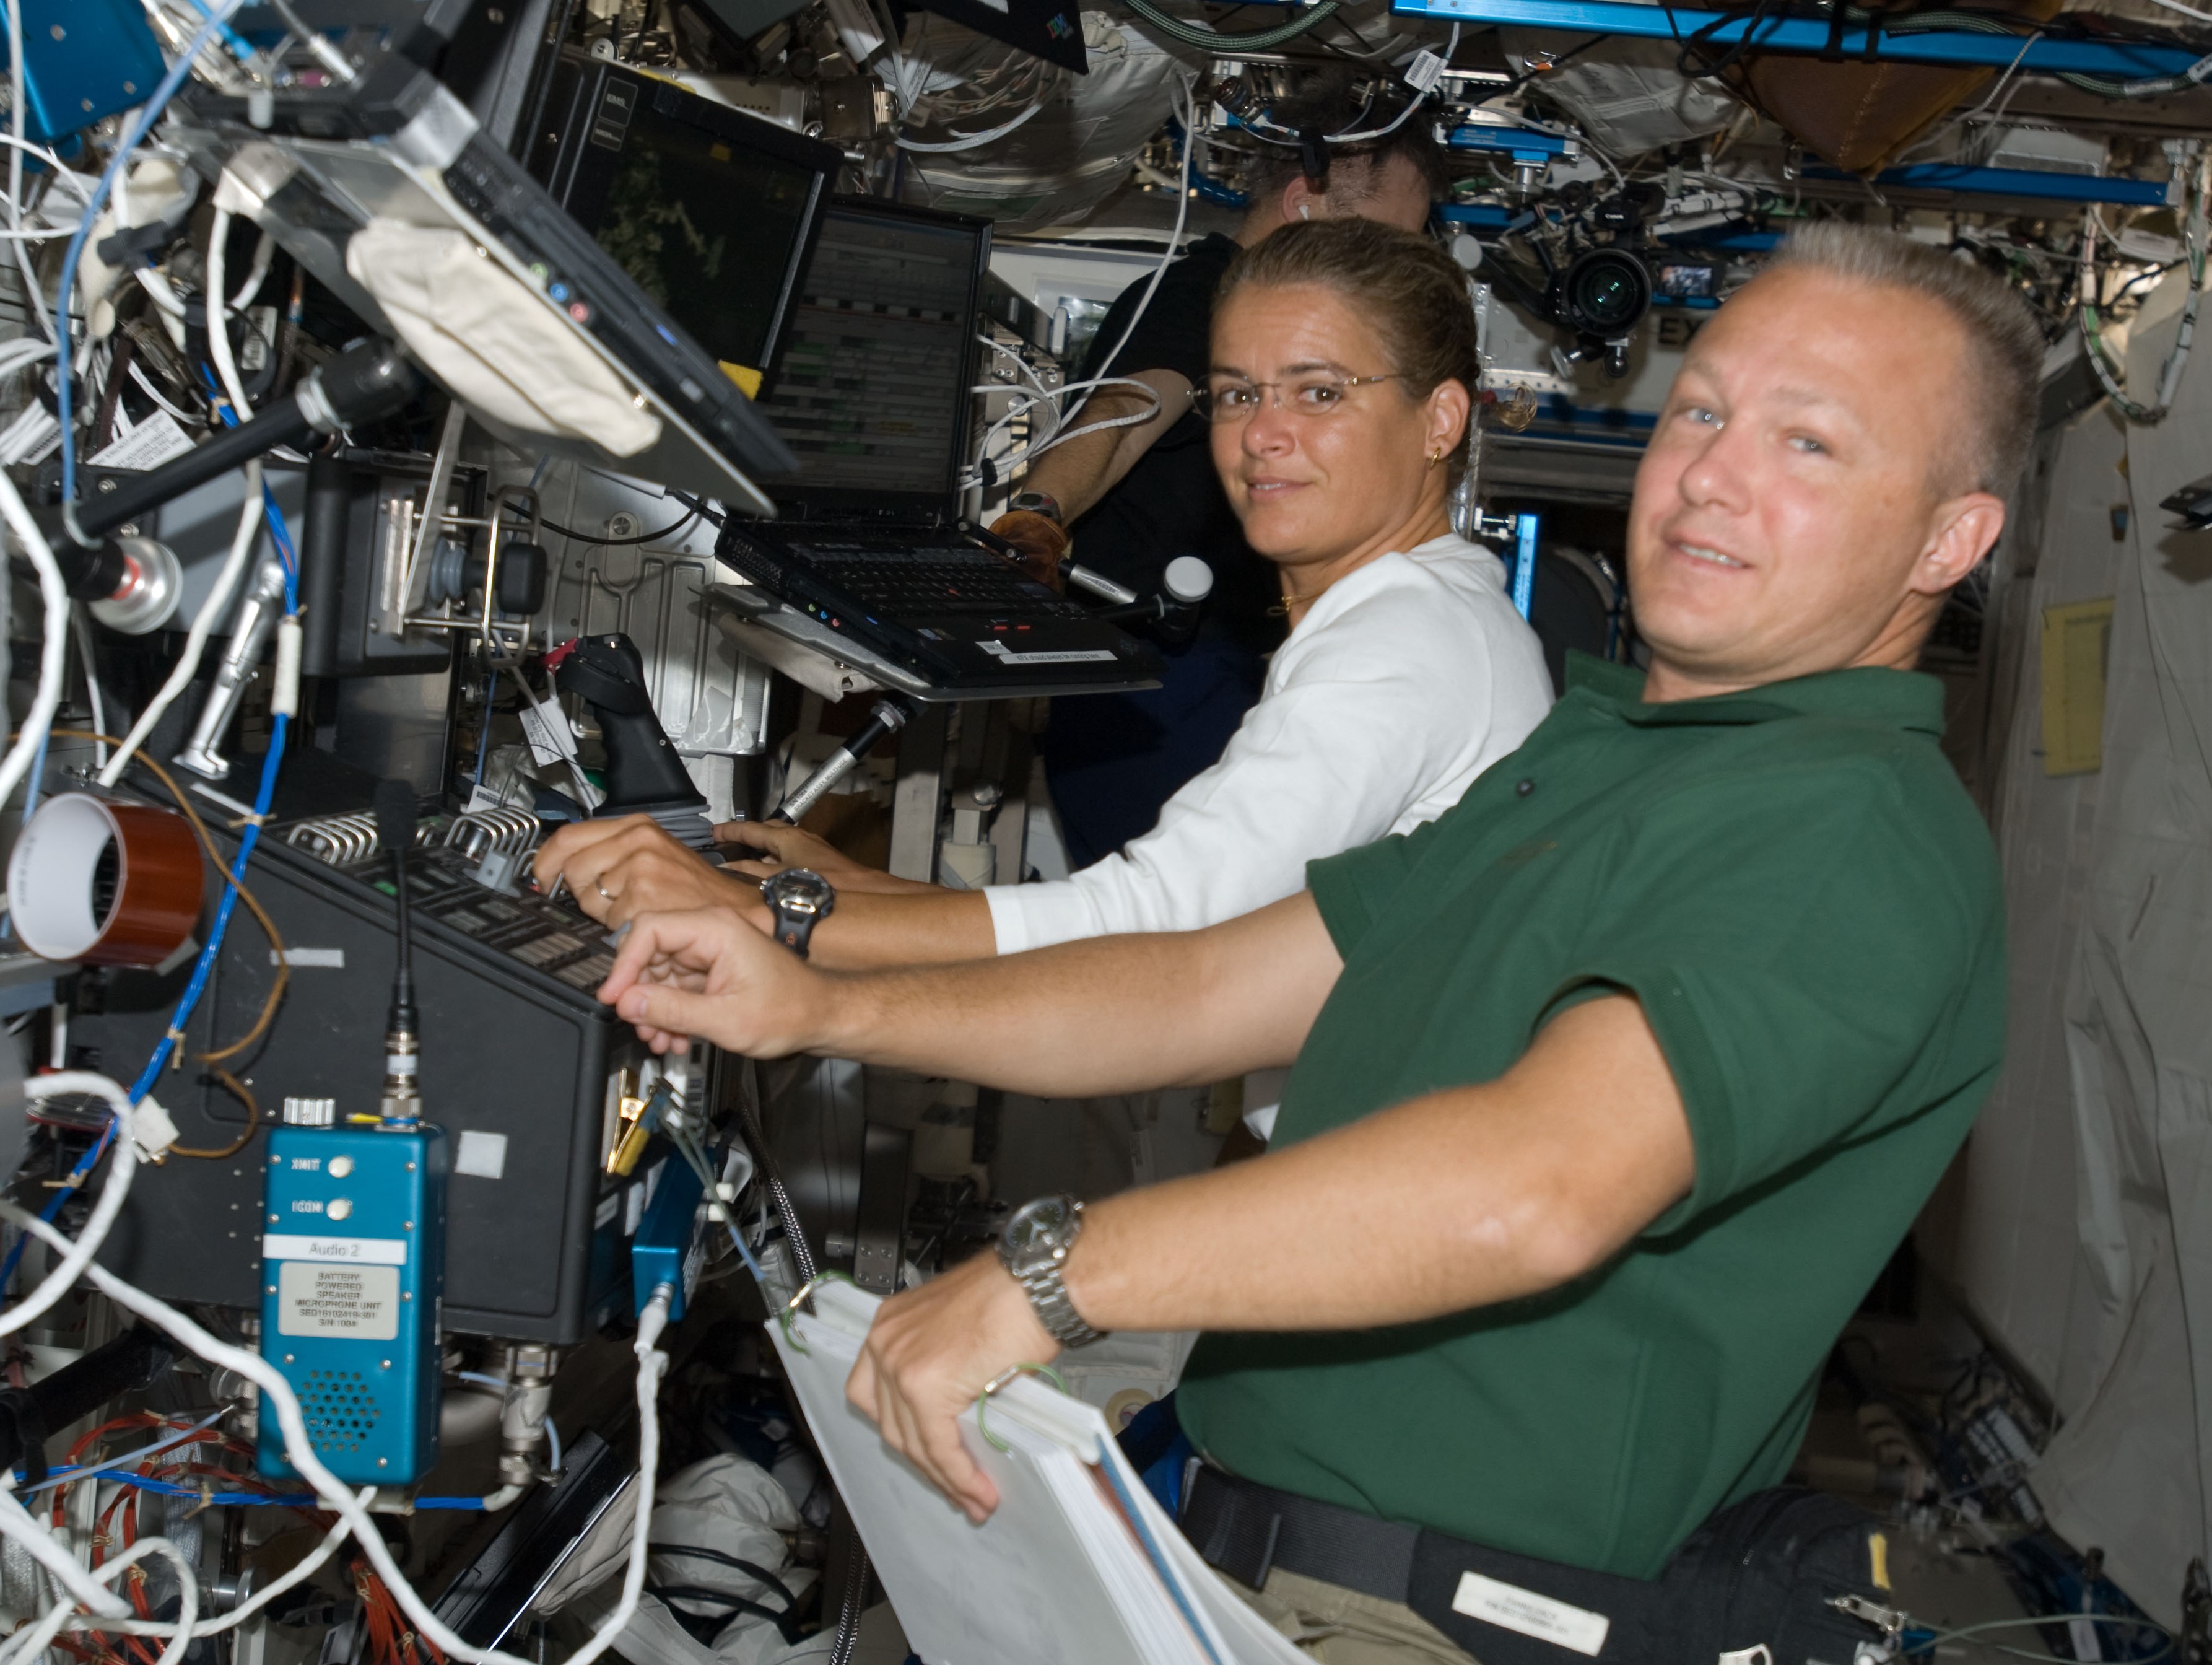 Canadian Space Agency astronaut Julie Payette, left, and NASA astronaut Douglas G. Hurley operate the station’s robotic arm during the fourth spacewalk